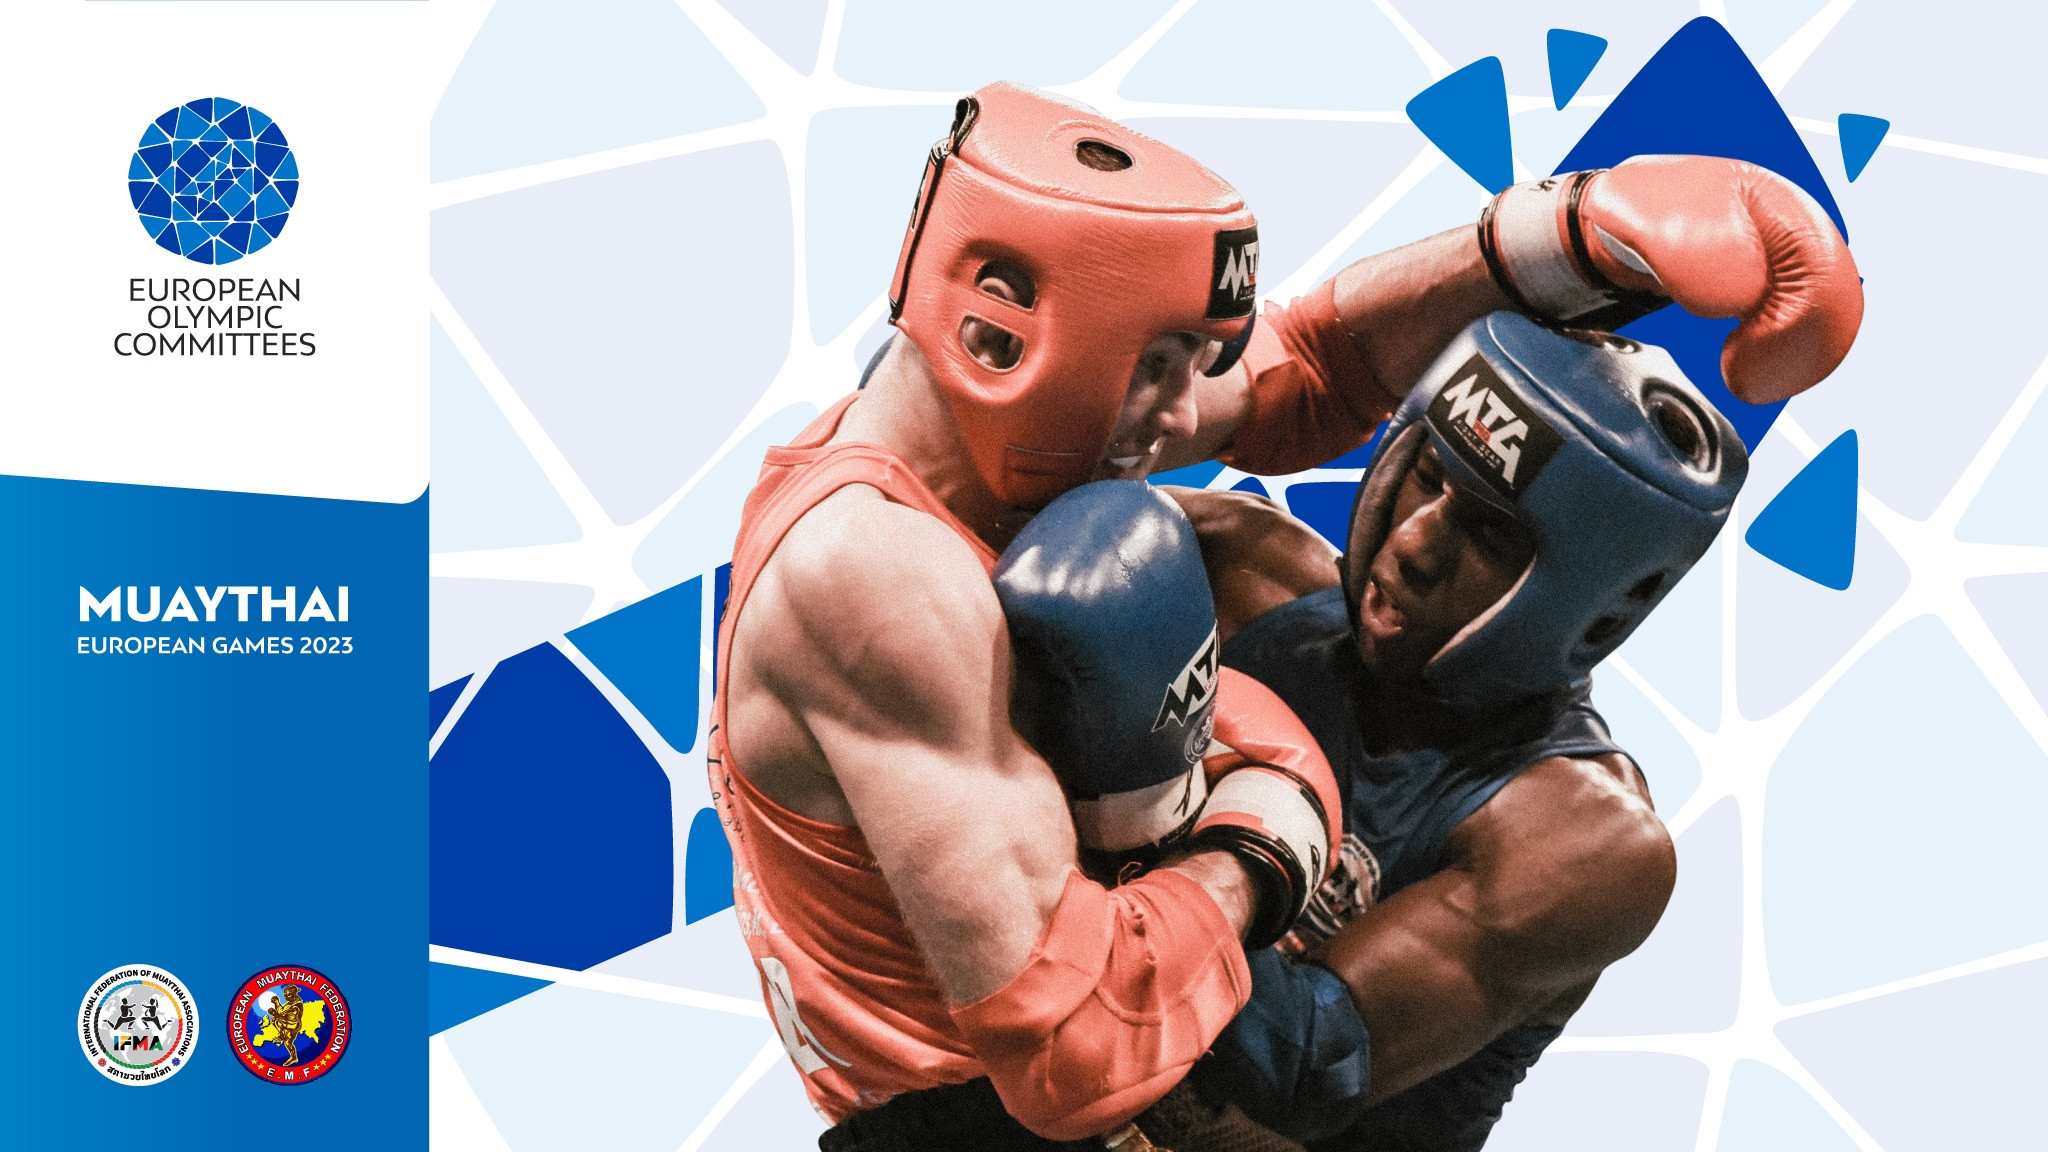 Muaythai is set to make its debut at the European Games ©IFMA